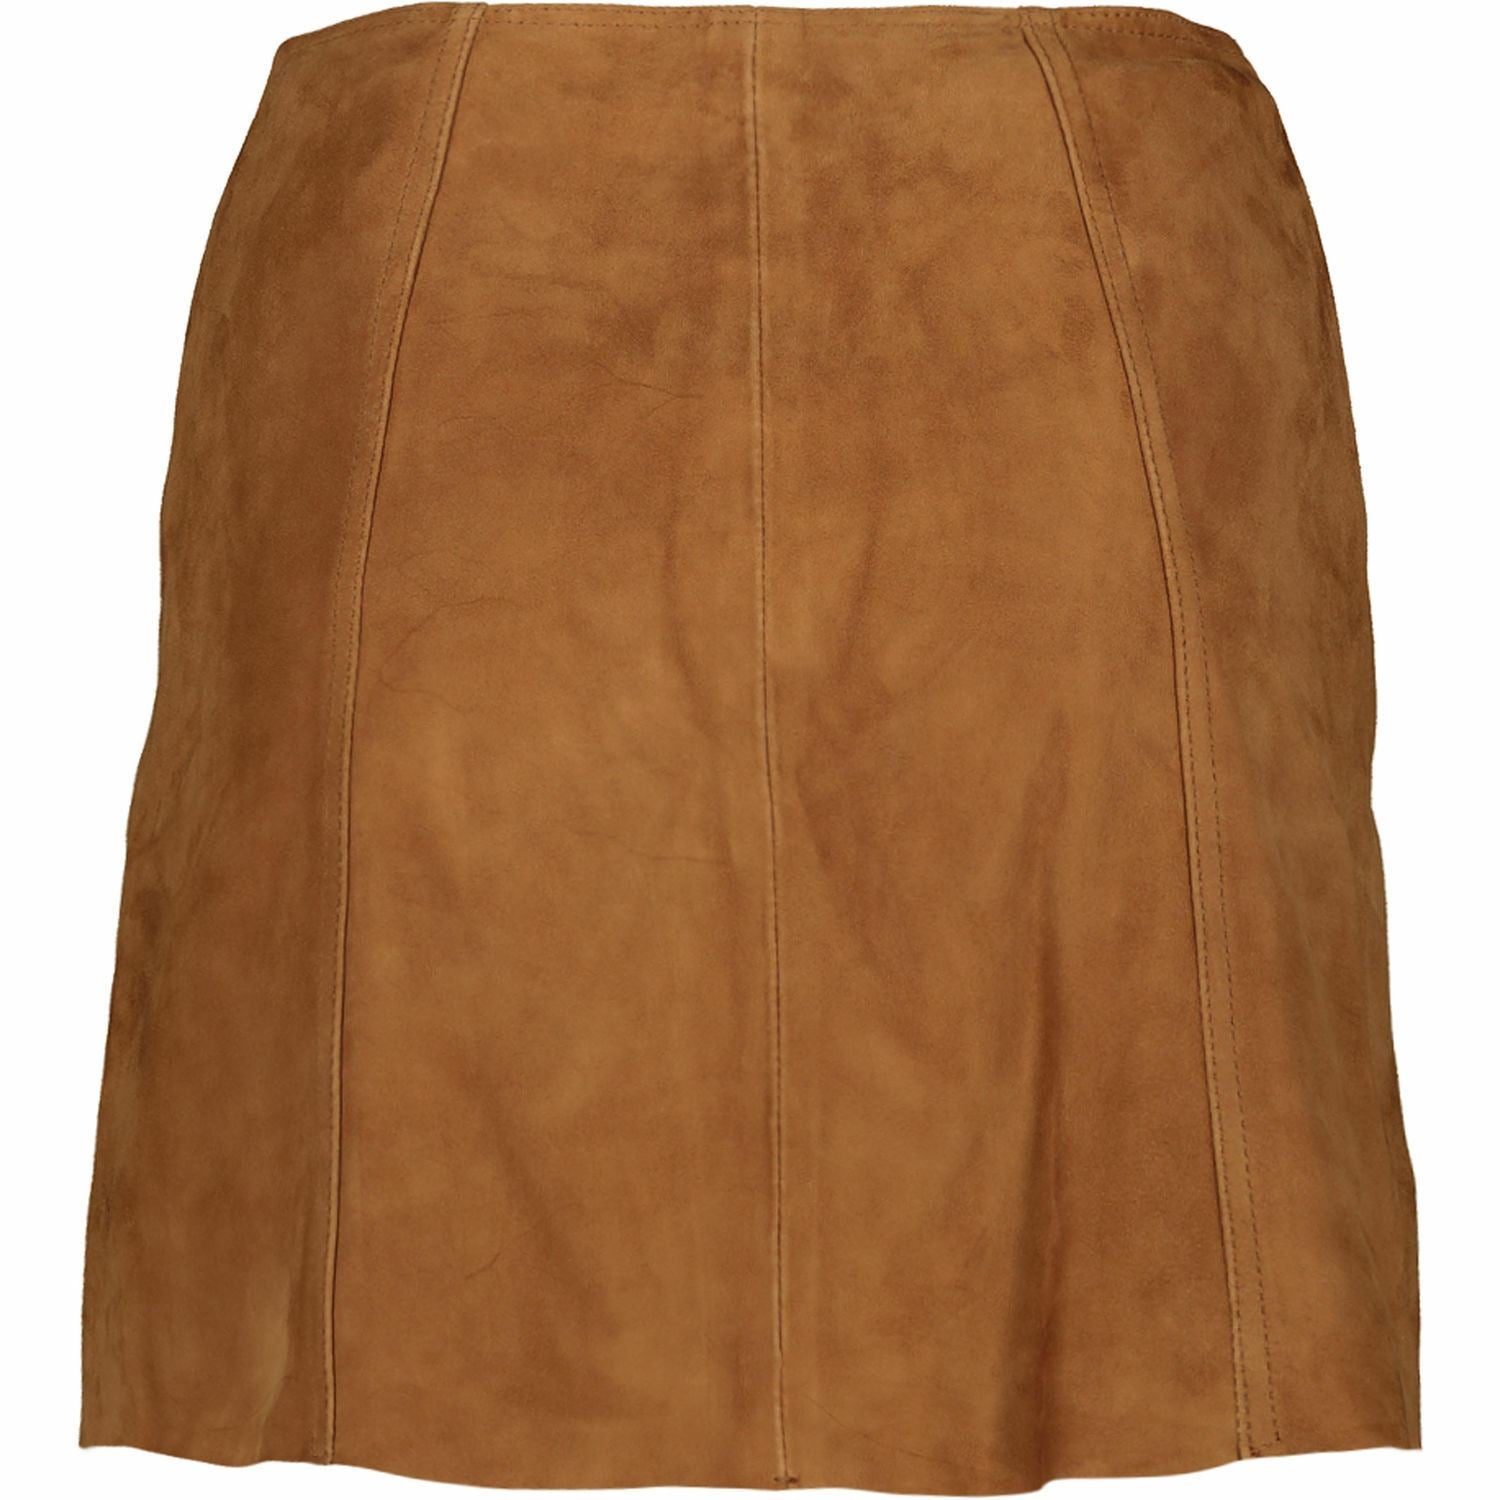 SUPERDRY -Women's Tan Button through Suede /Leather Skirt-XS, S, M, L